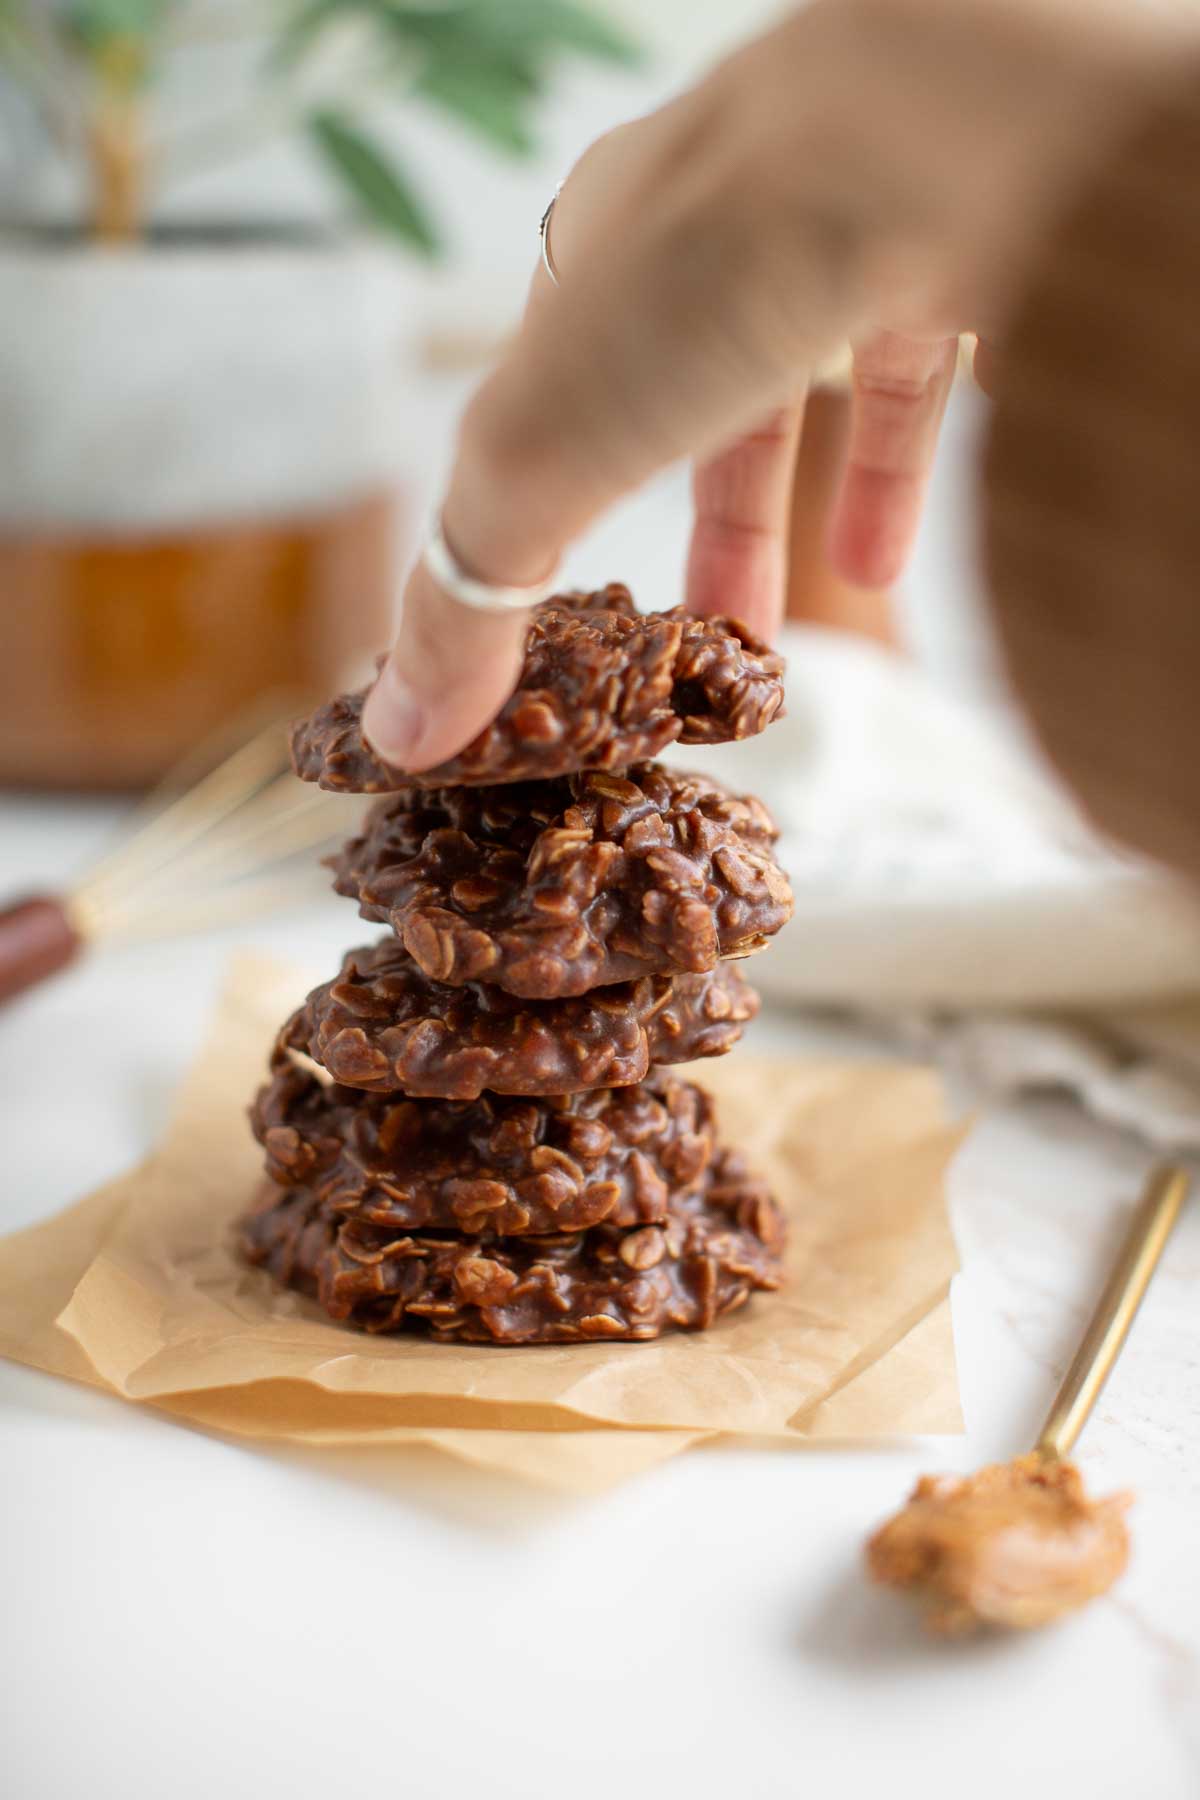 Hands reaching for a stack of vegan no-bake cookies.